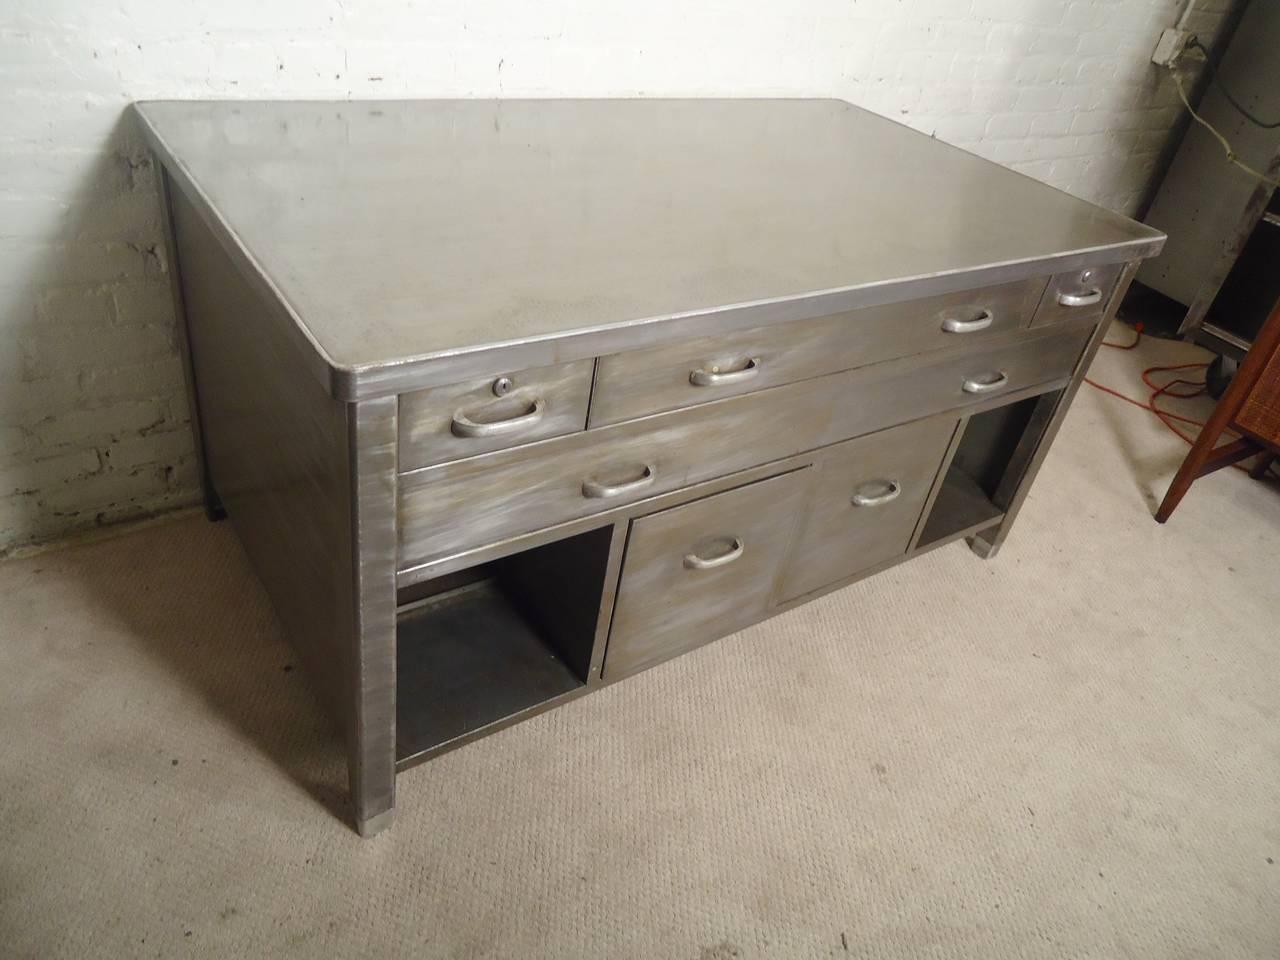 Massive Industrial Workstation Table In Distressed Condition In Brooklyn, NY